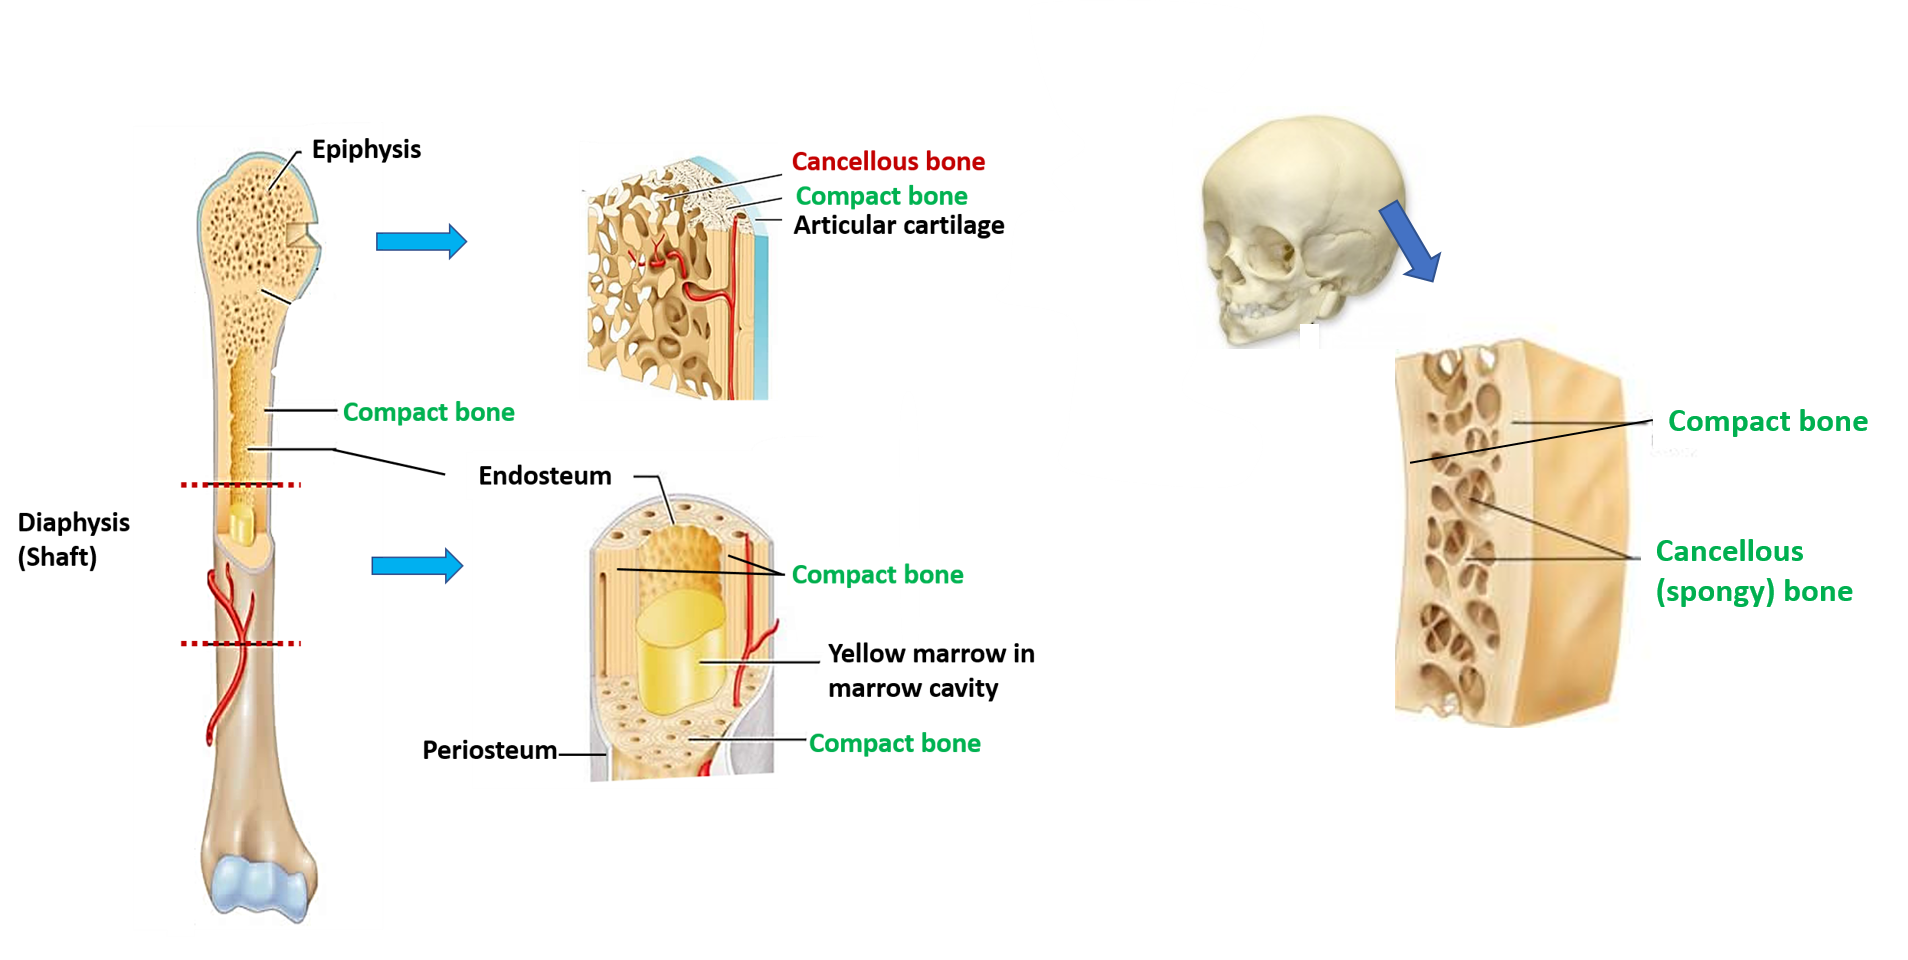 cancellous and compact bone